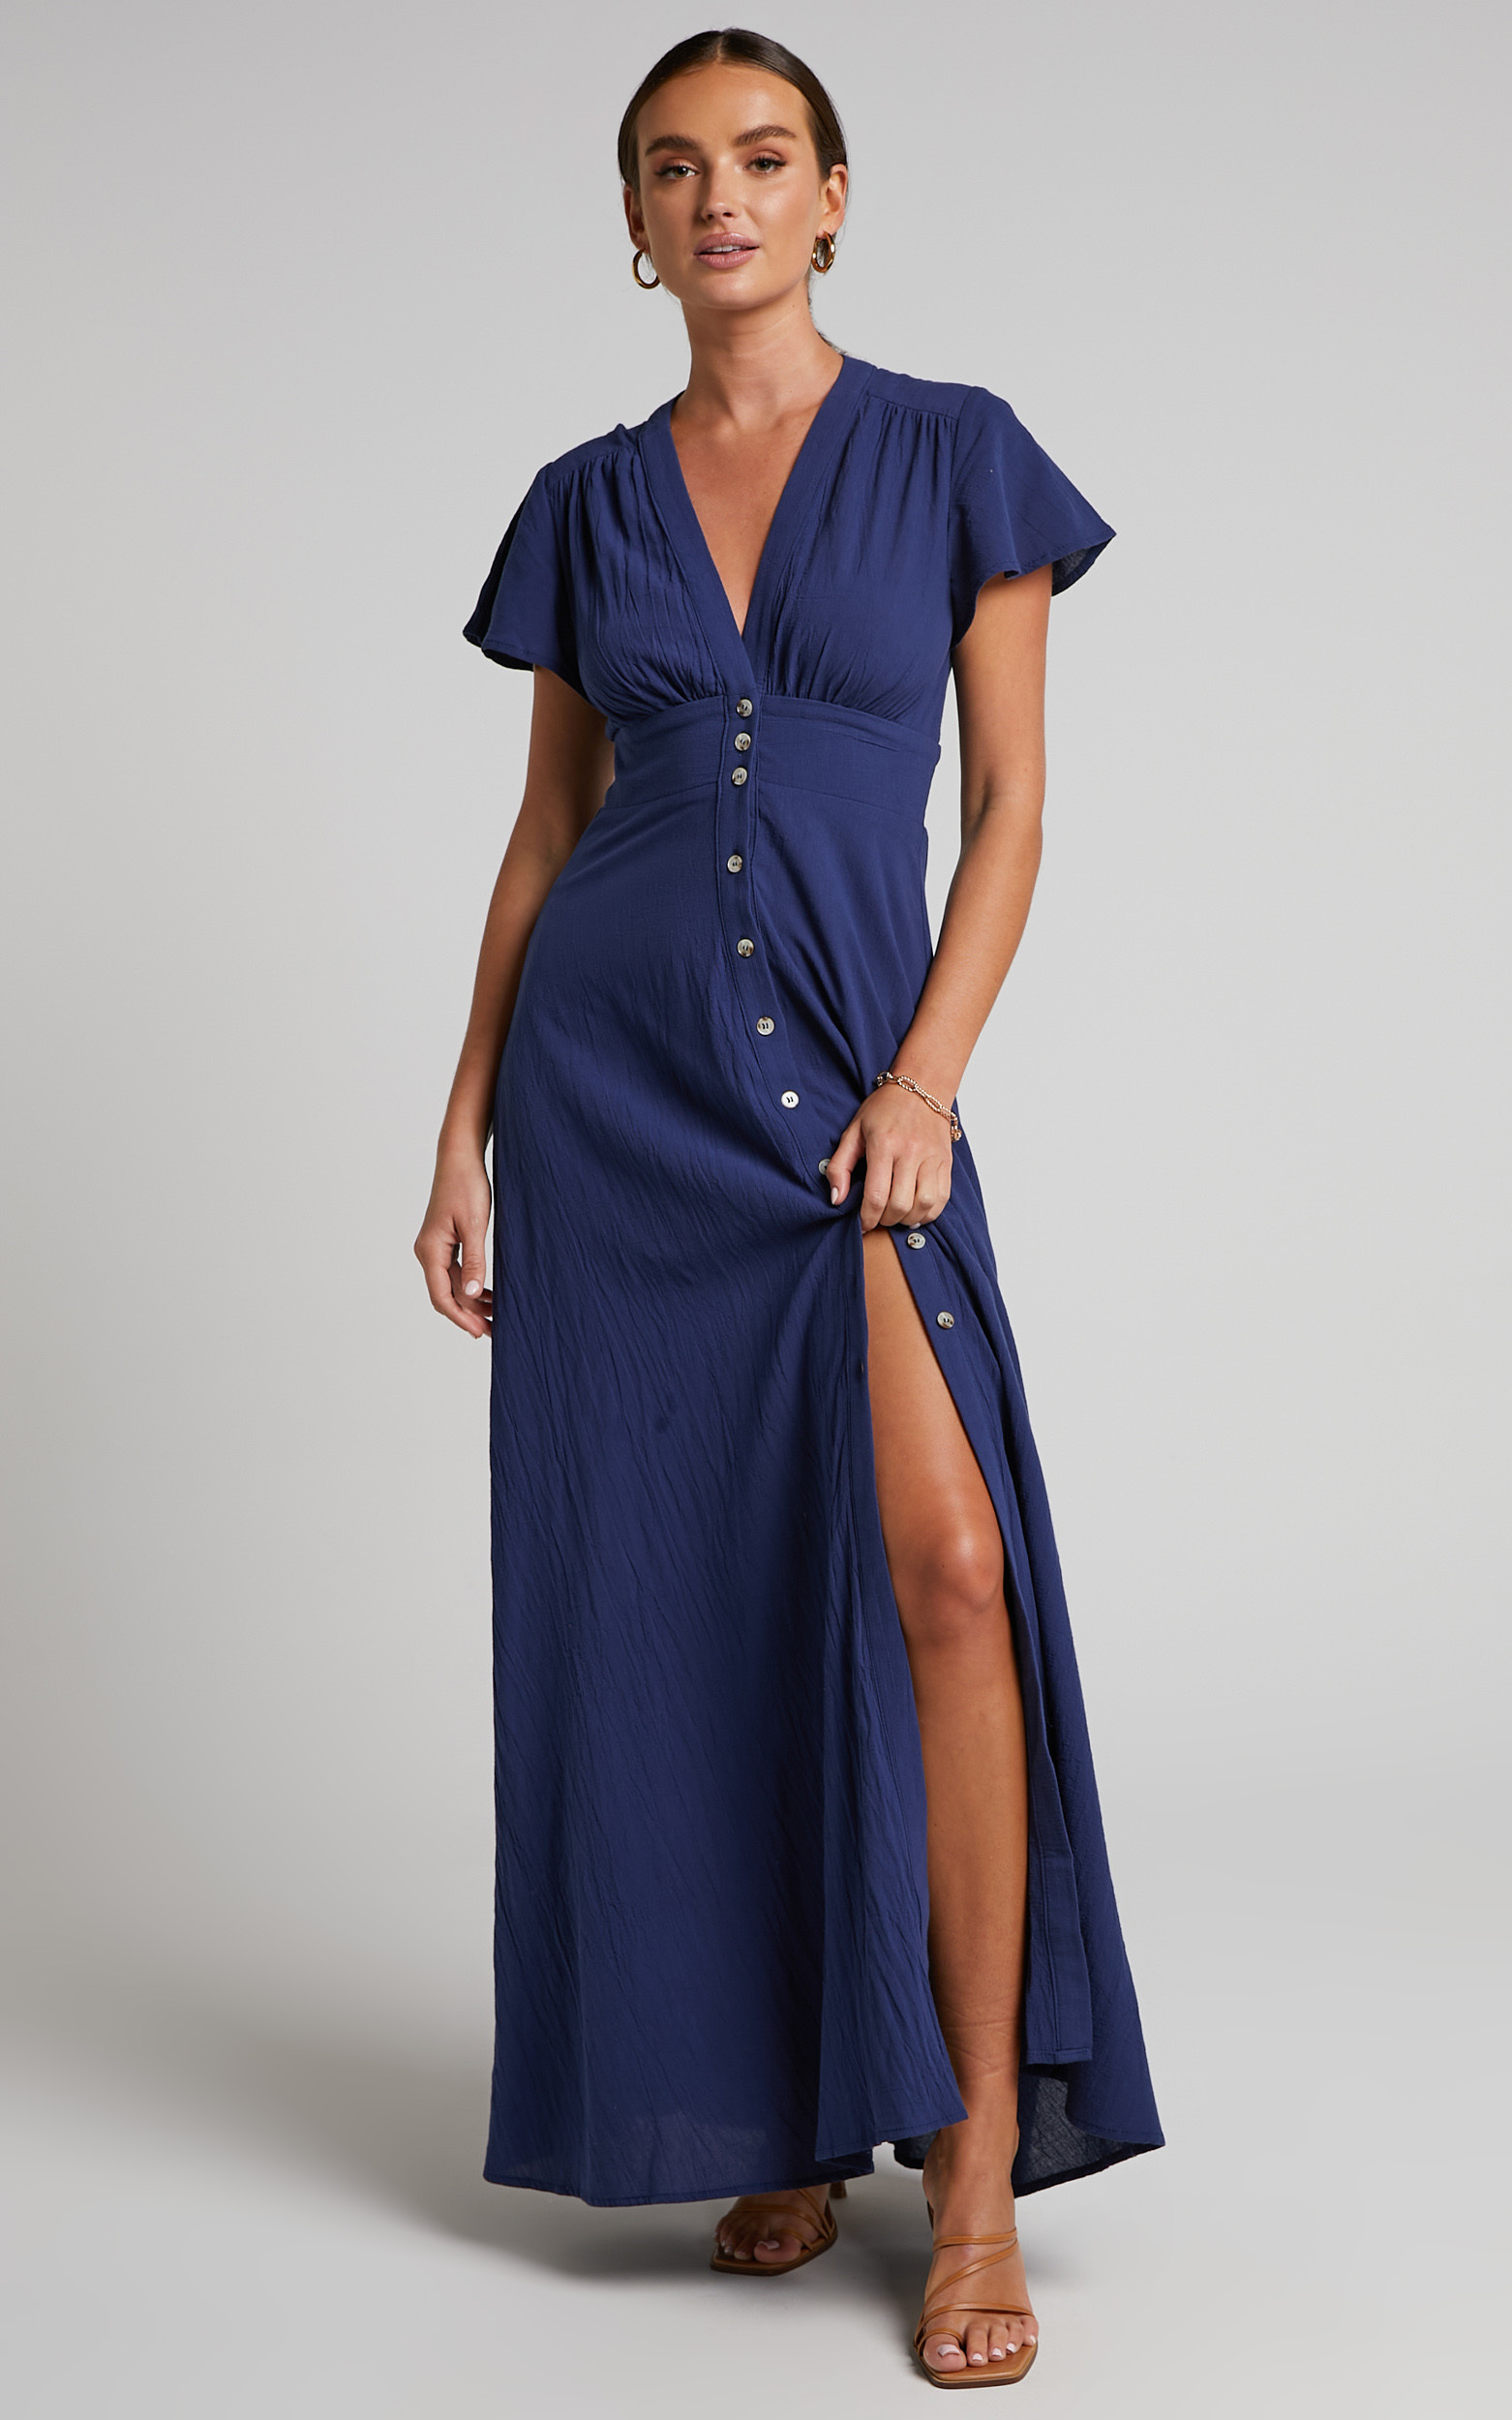 Elijah Empire Waist Button Down Maxi Dress in Navy - 06, NVY2, hi-res image number null